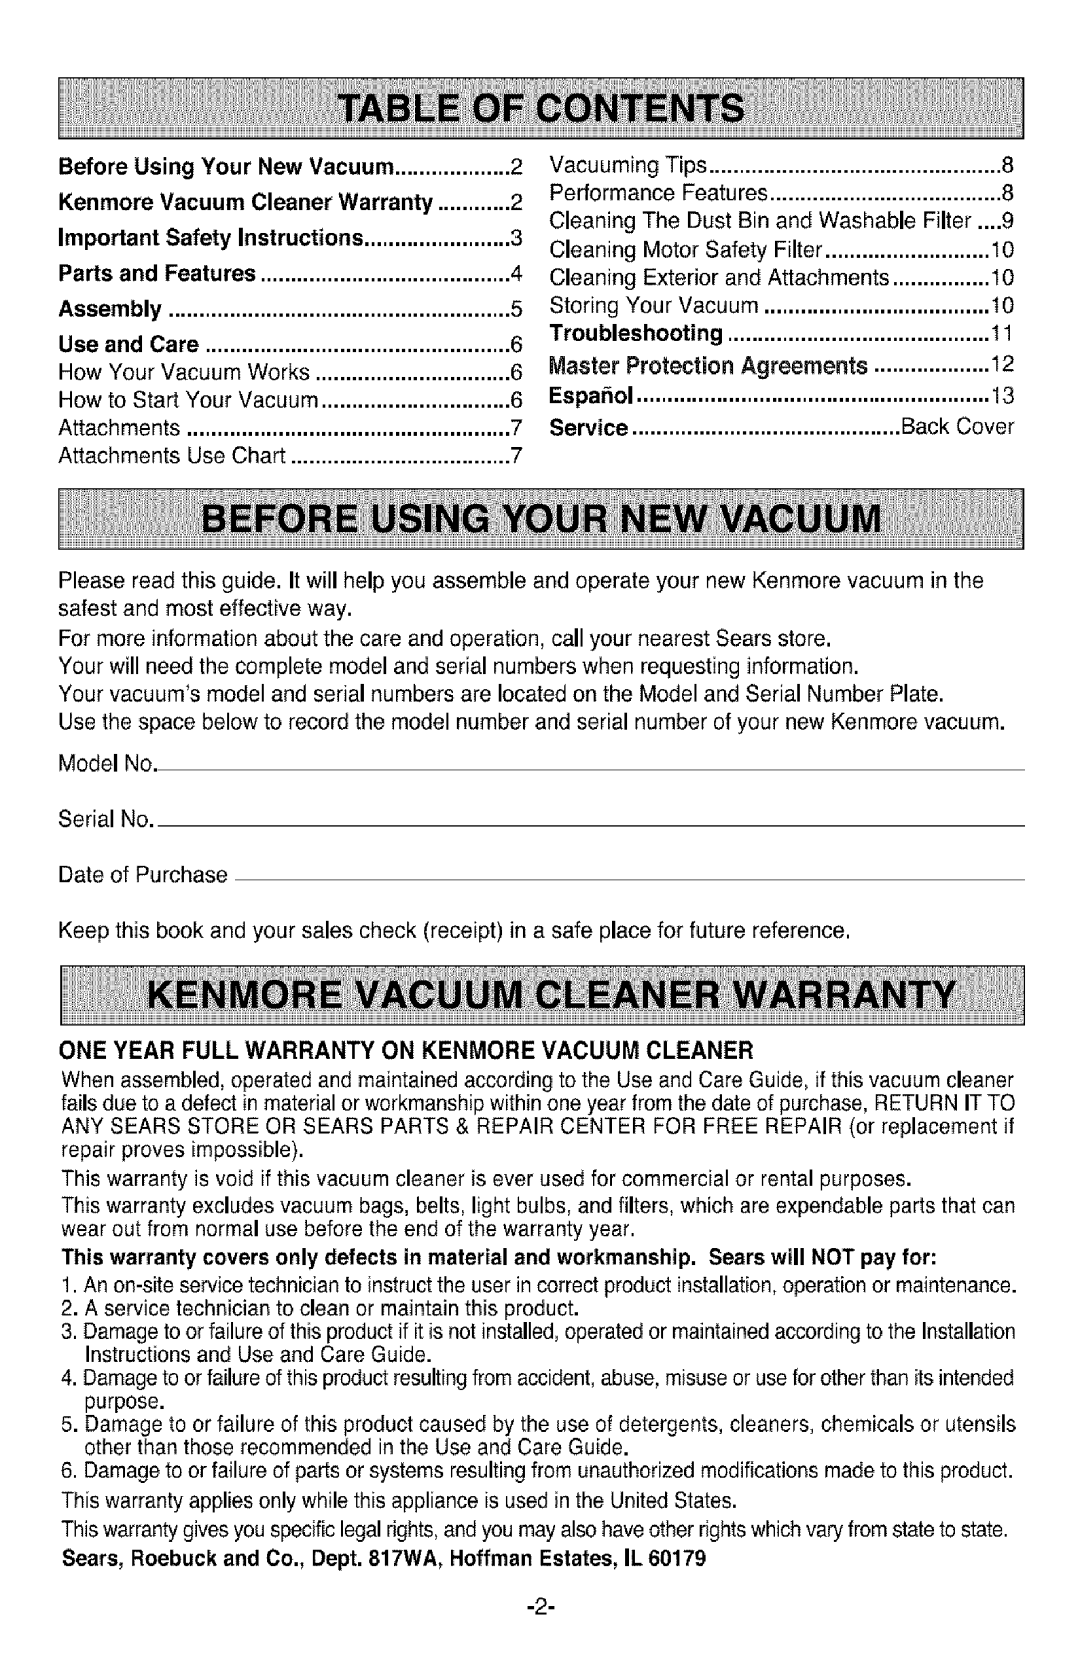 Kenmore 3828FI2852V manual Kenmore Vacuum Cleaner Warranty, Before Using Your New Vacuum, Important Safety Instructions 